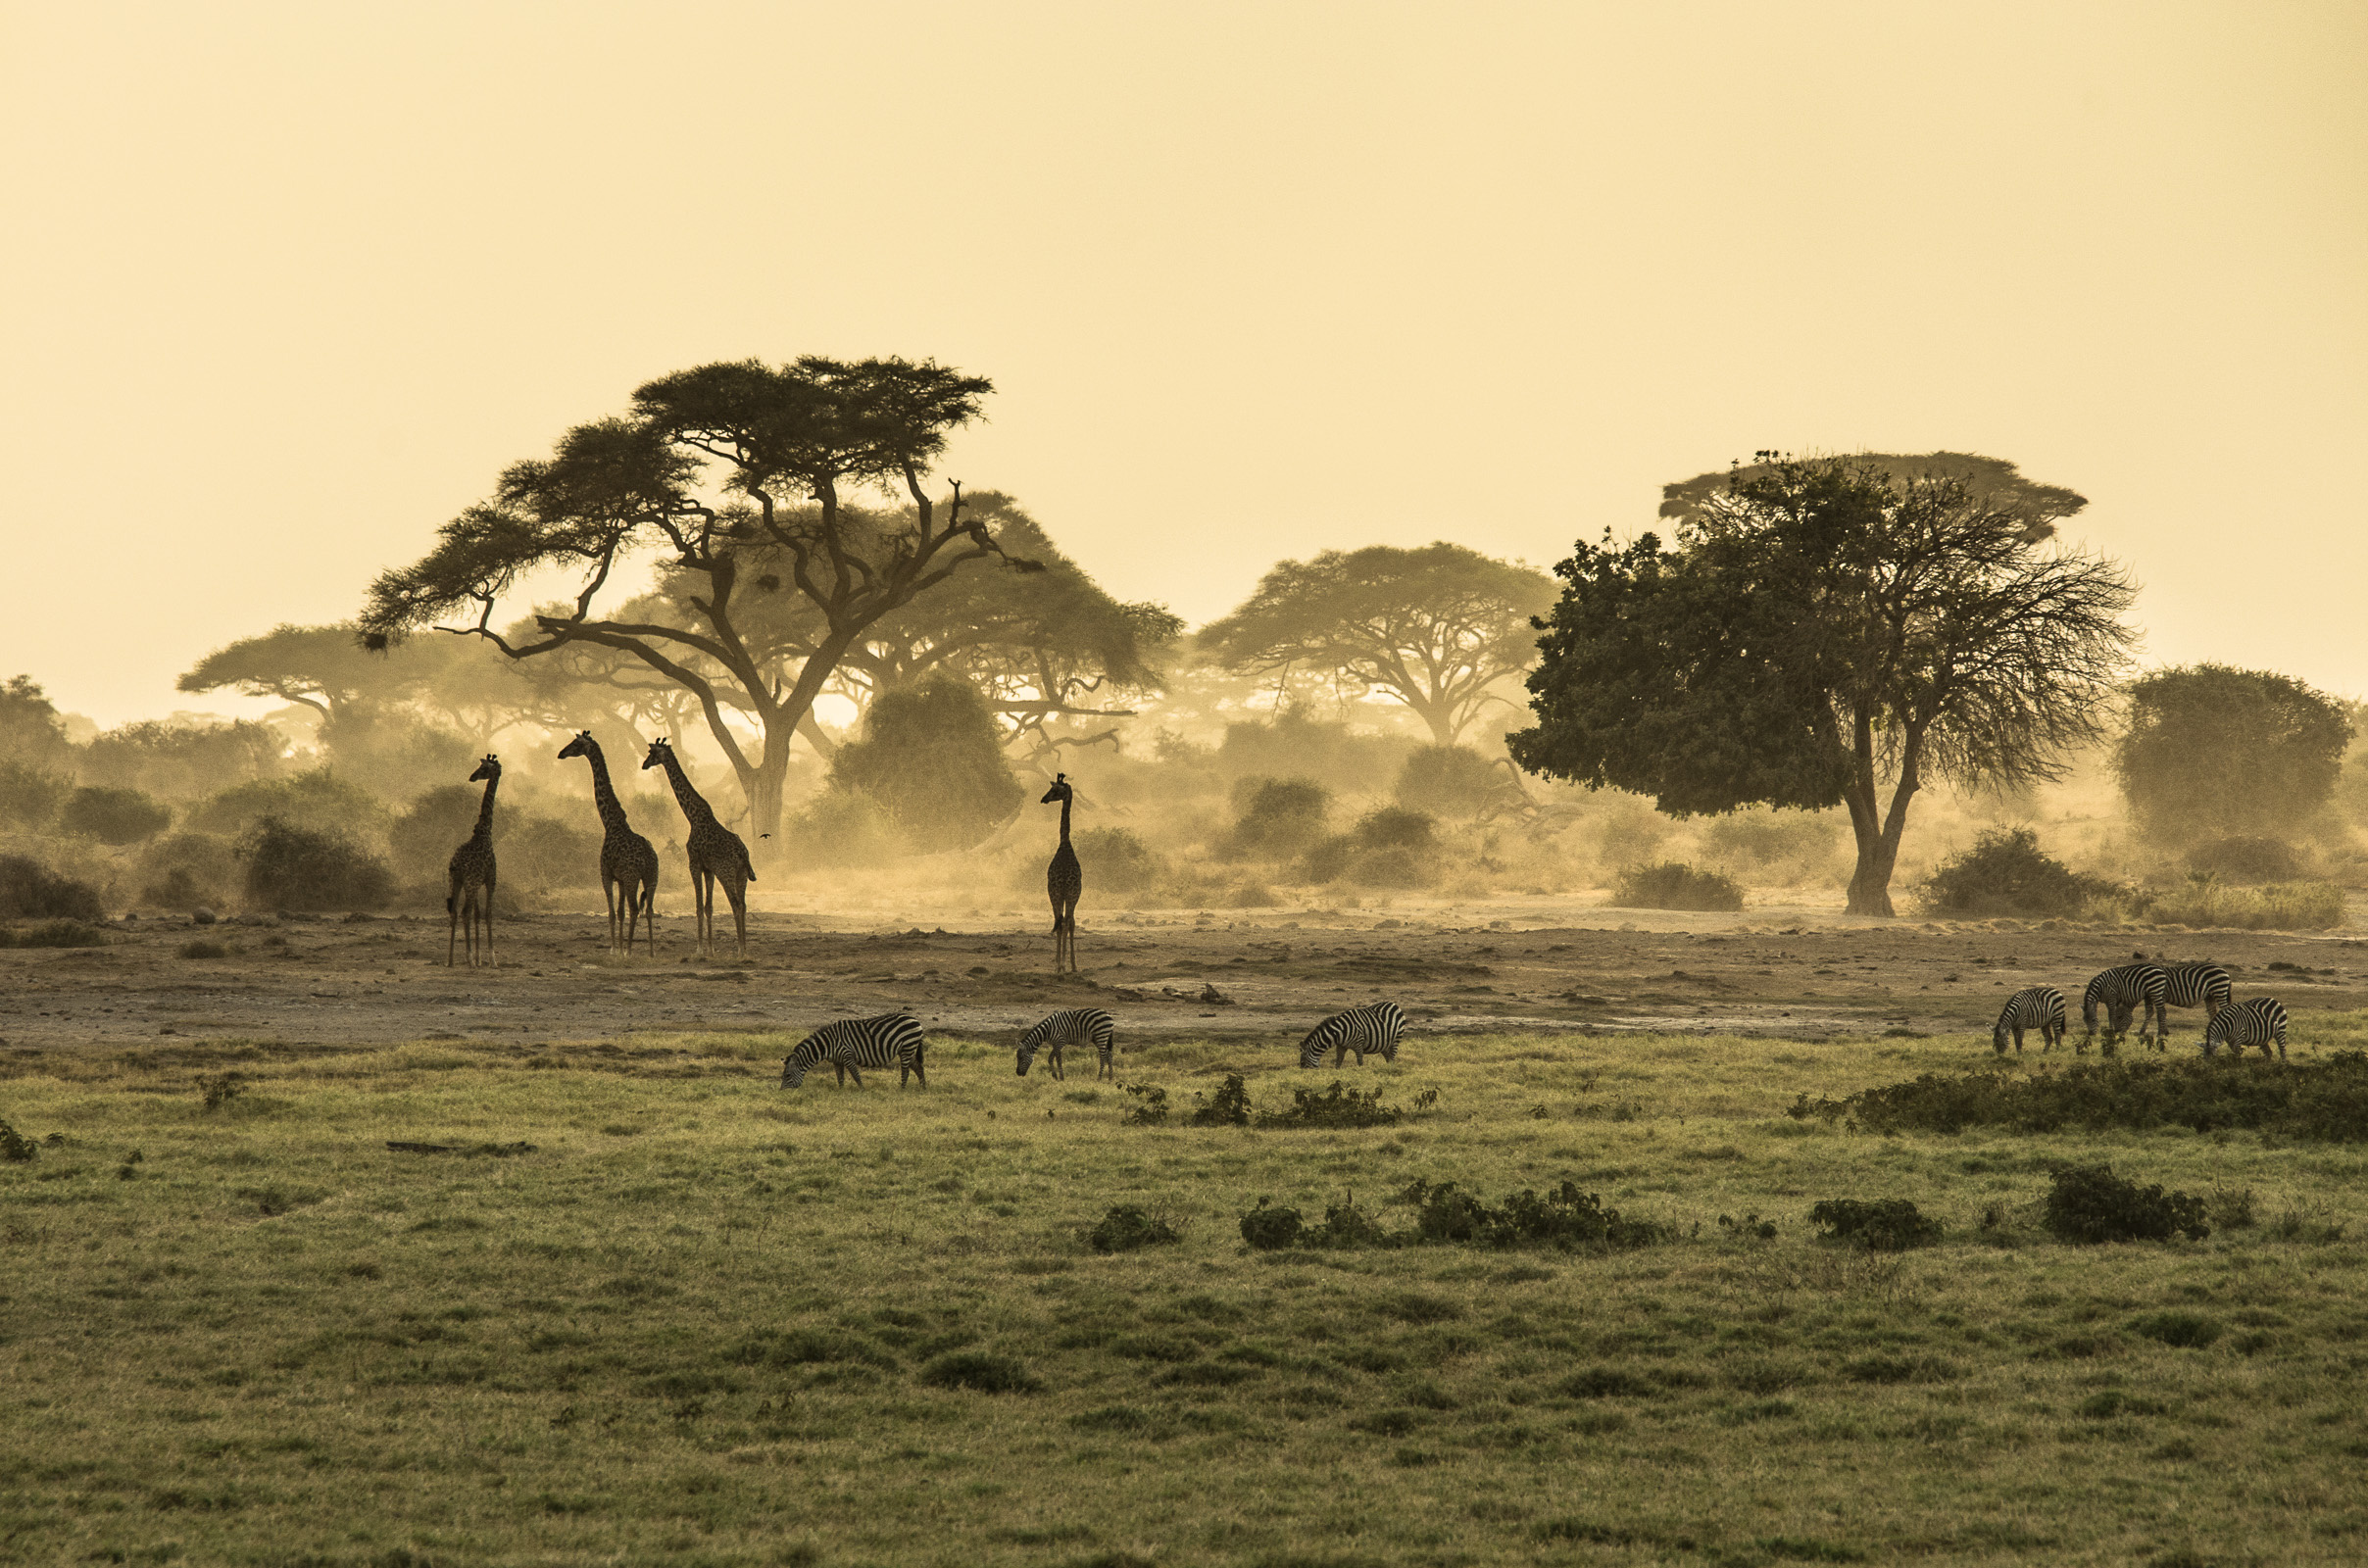 An image of a misty savannah with several grazing giraffes and zebras, and the silhouettes of trees in the background.